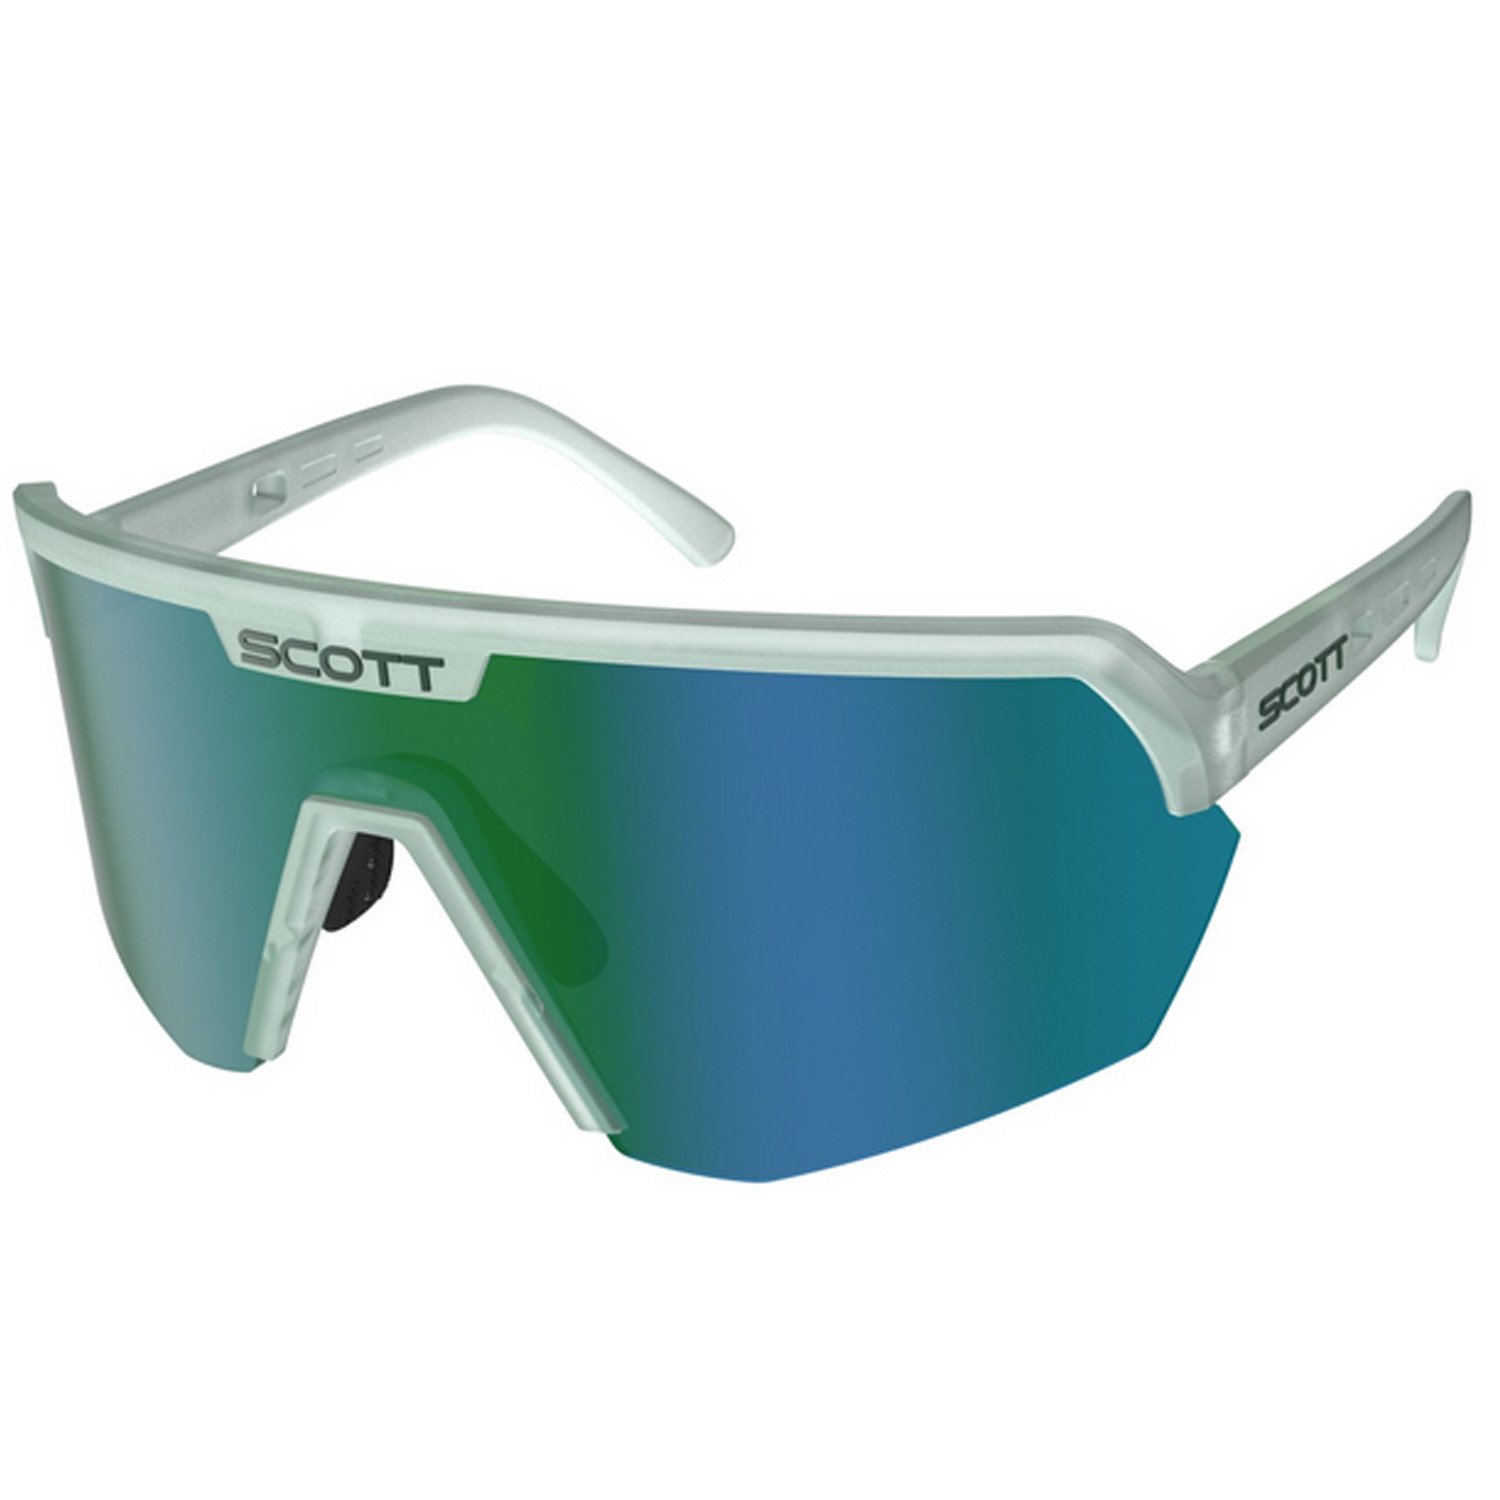 Очки велосипедные SCOTT Sport Shield, mineral blue green chrome, ES281188-7240121 400nm 480nm blue laser protective goggles for 405nm 450nm 480nm diode eye protection